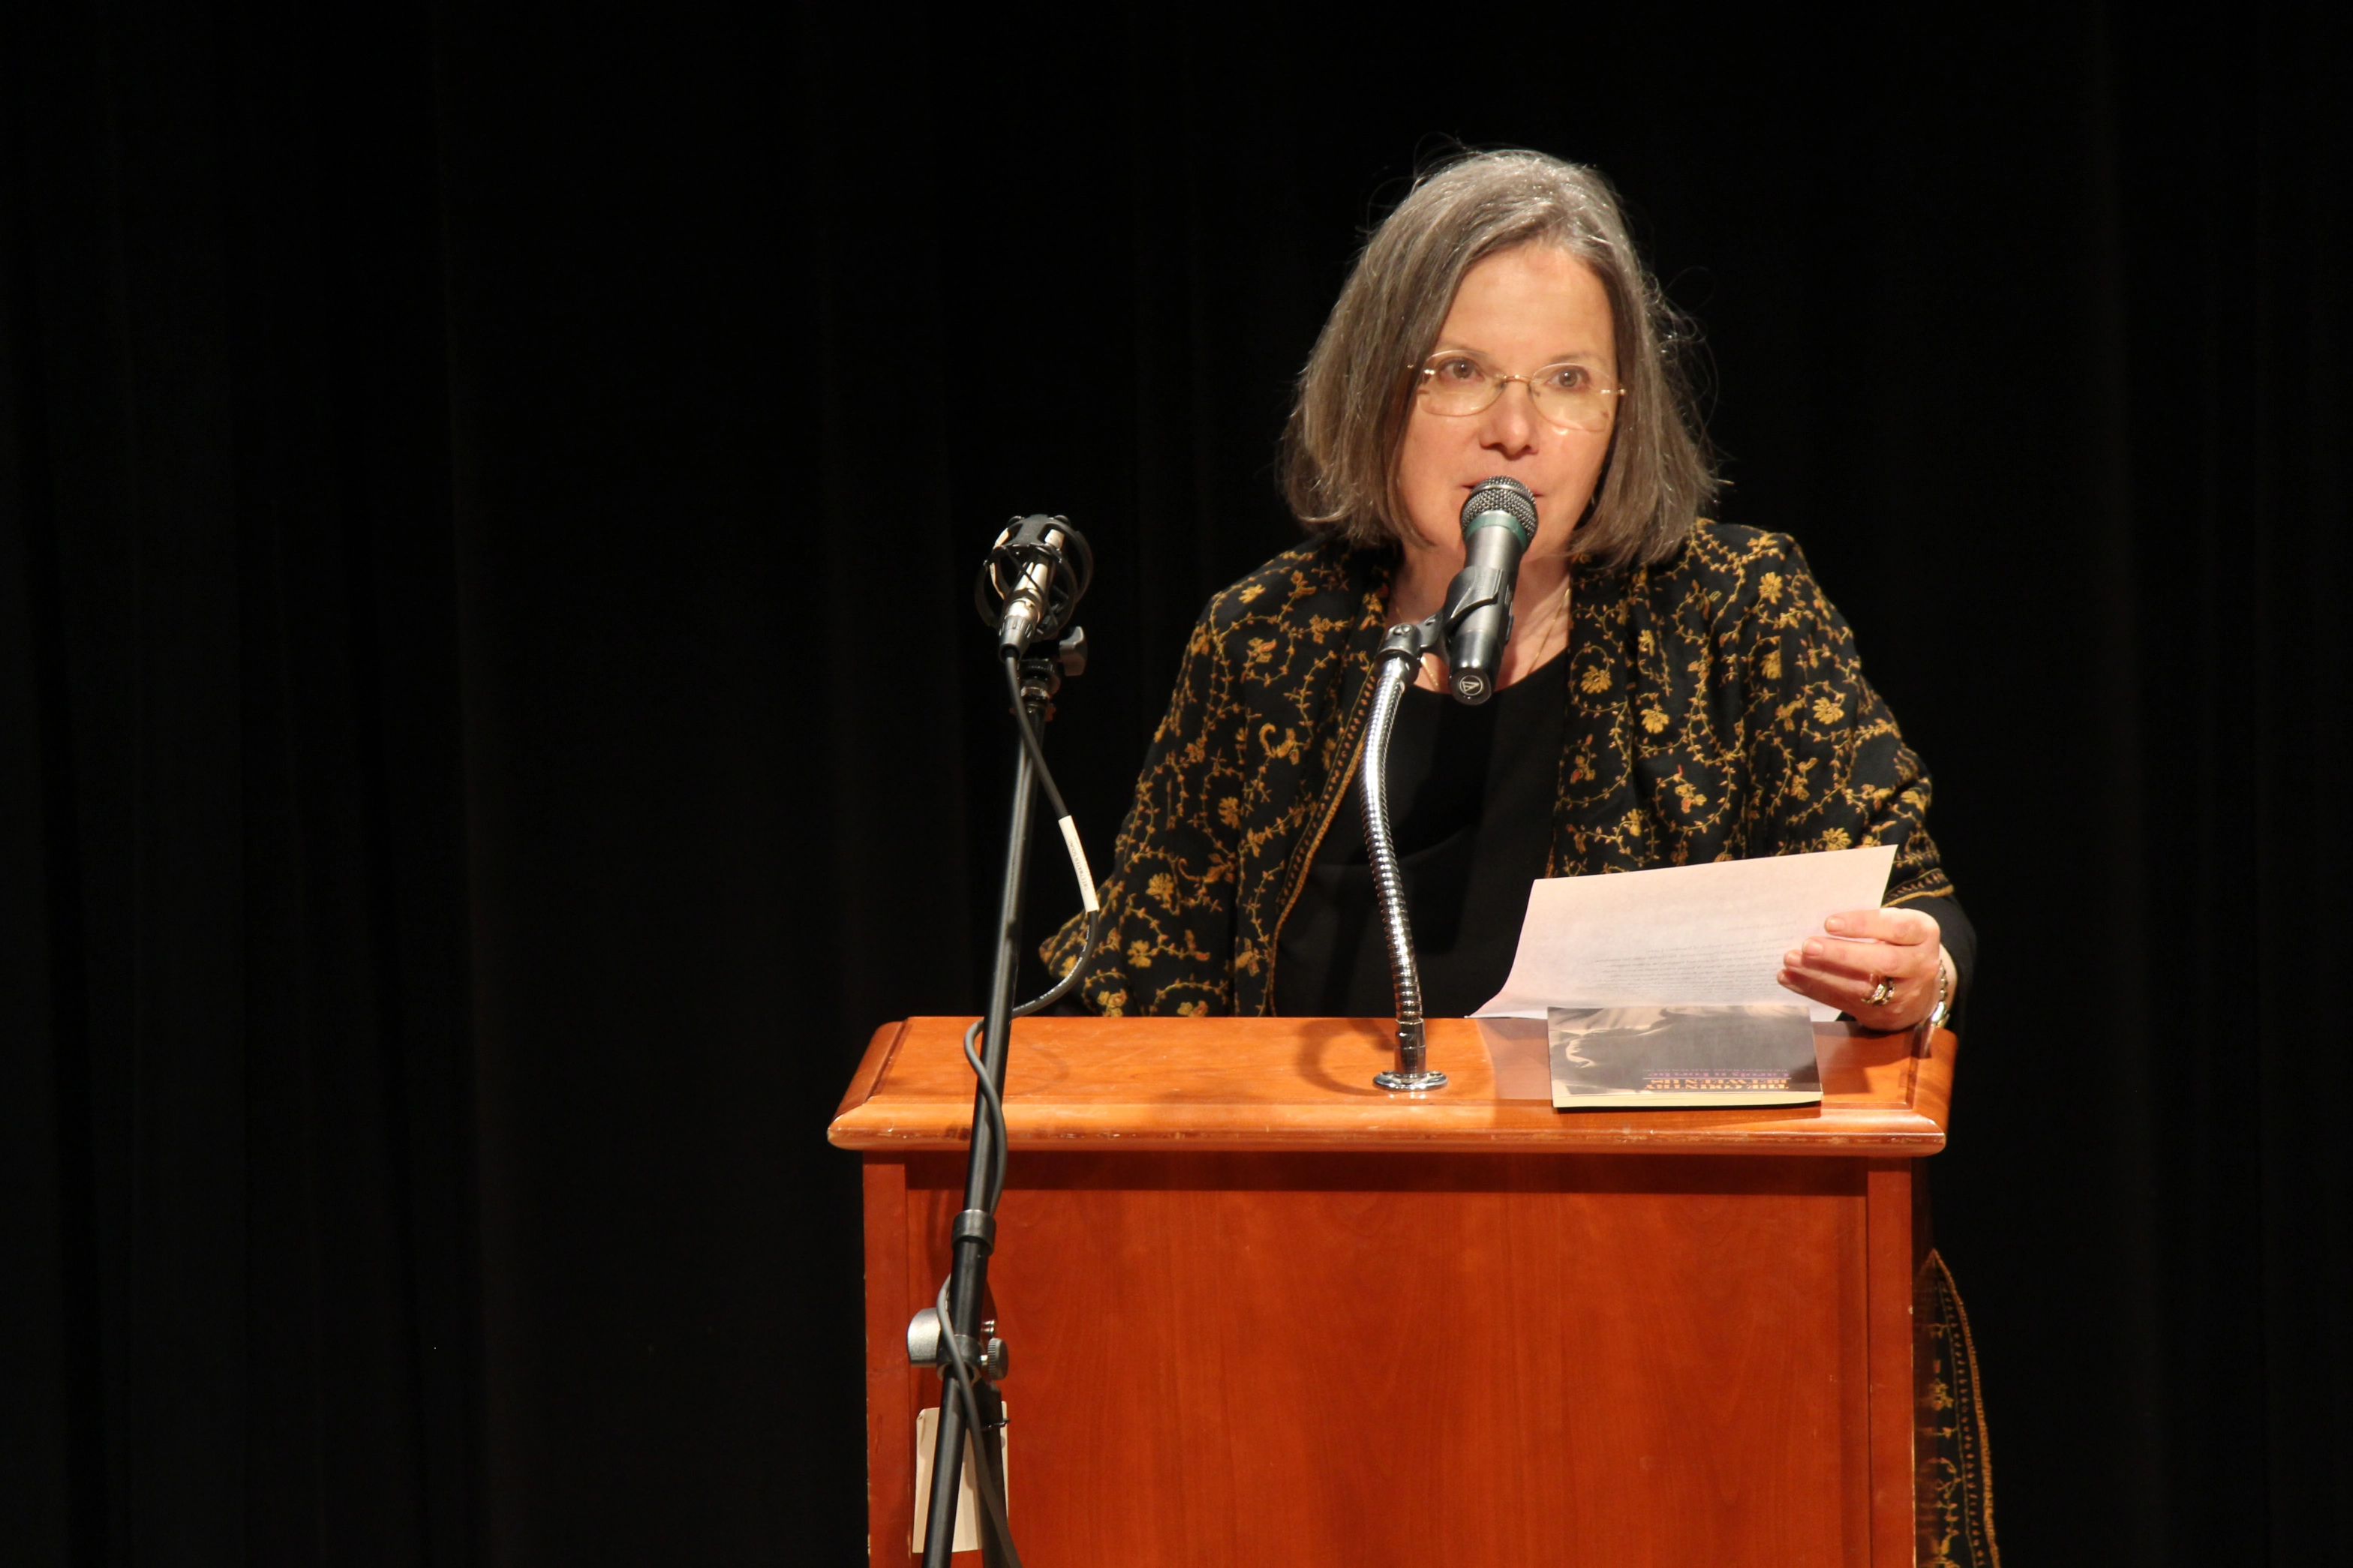 Renowned poet, activist, and MSU alumna Carolyn Forché returns to campus